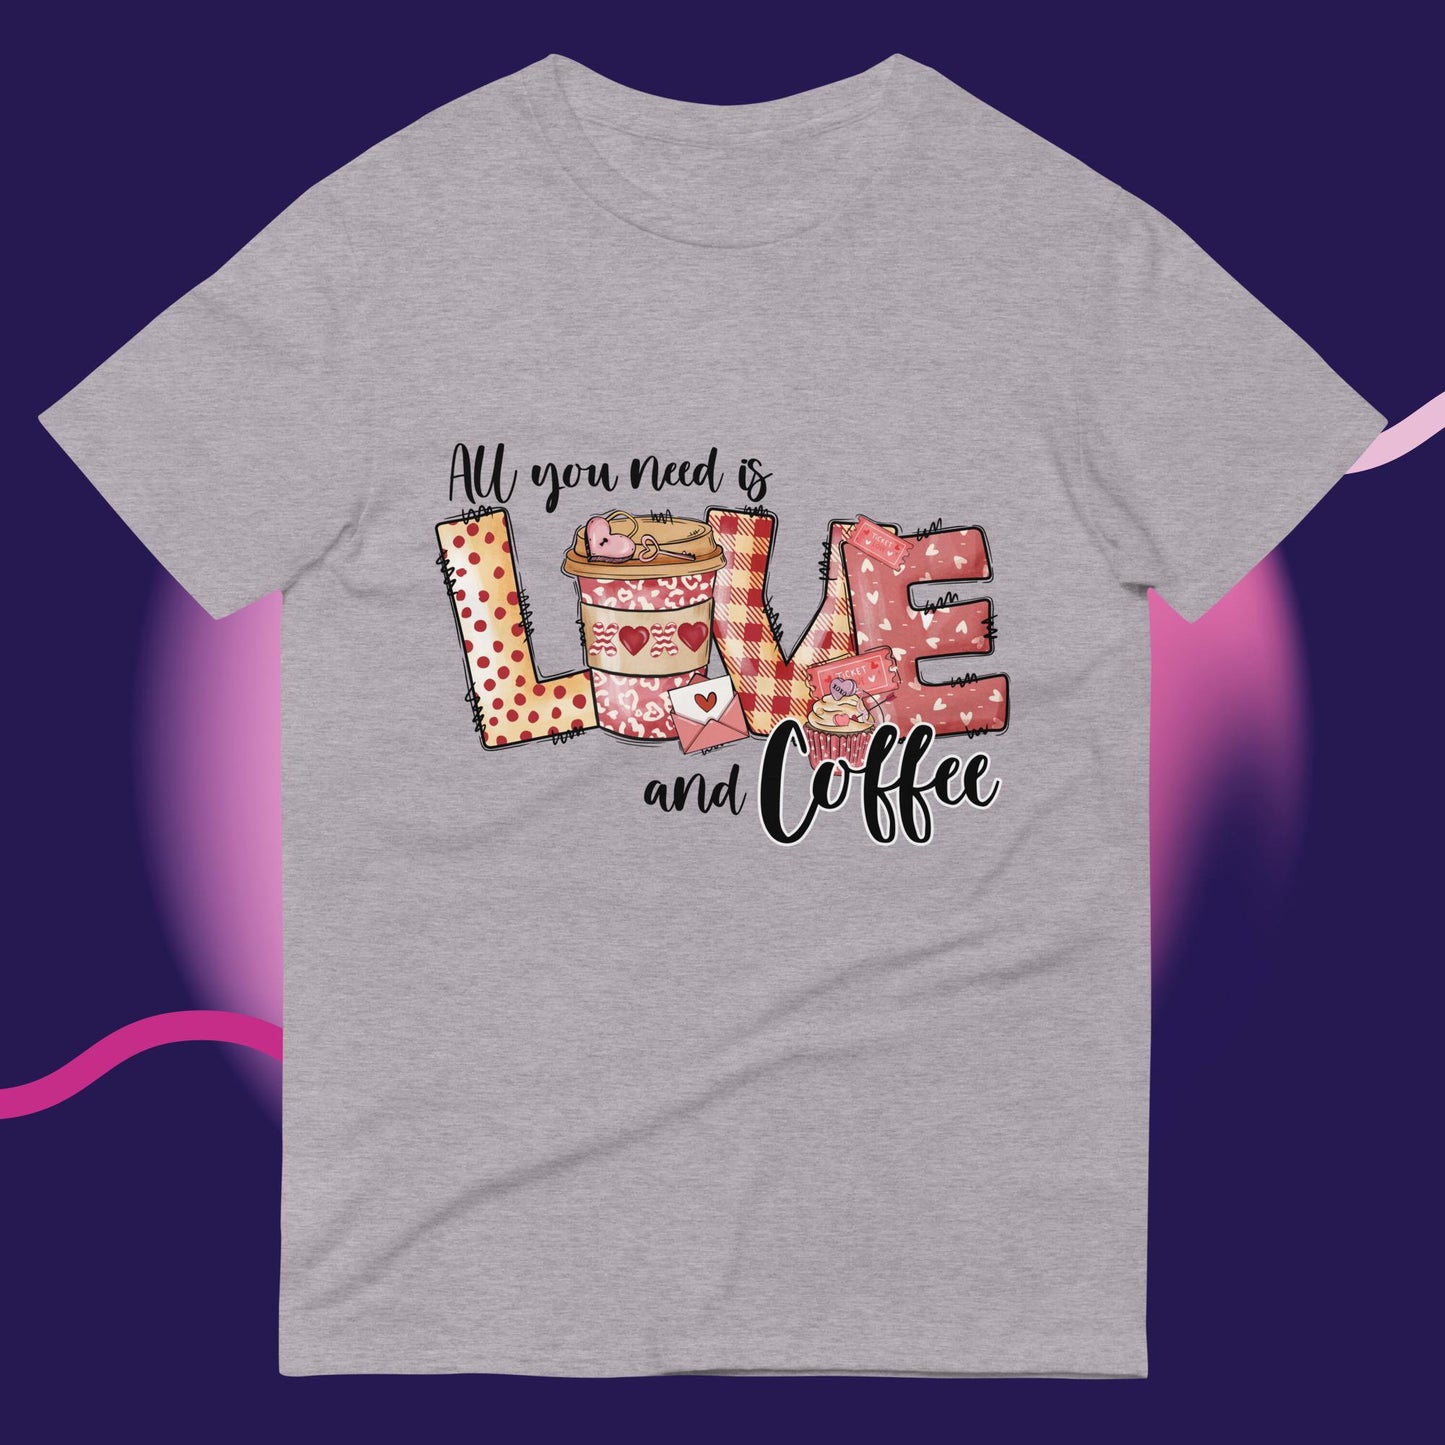 Sparkle-kiss-creations-all-you-need-is-love-coffee-t-shirt-light-gray